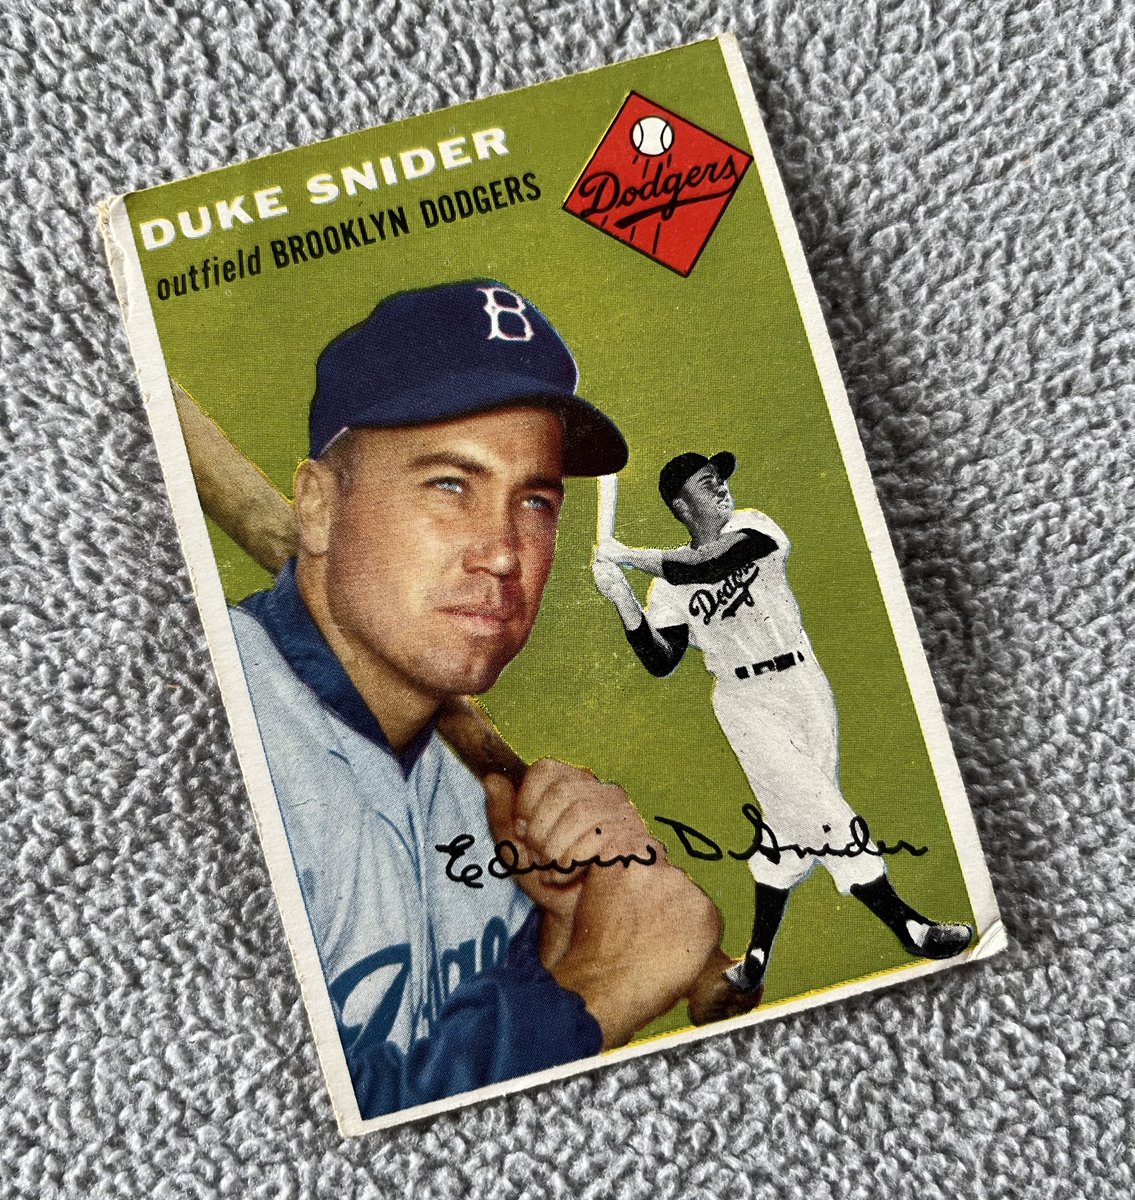 The Duke of Flatbush! Adding this to my 1954 Topps set, bringing it to 127/250. The build continues! 🔵⚪️ #TheHobby #VintageTopps #BrooklynDodgers #BaseballCards